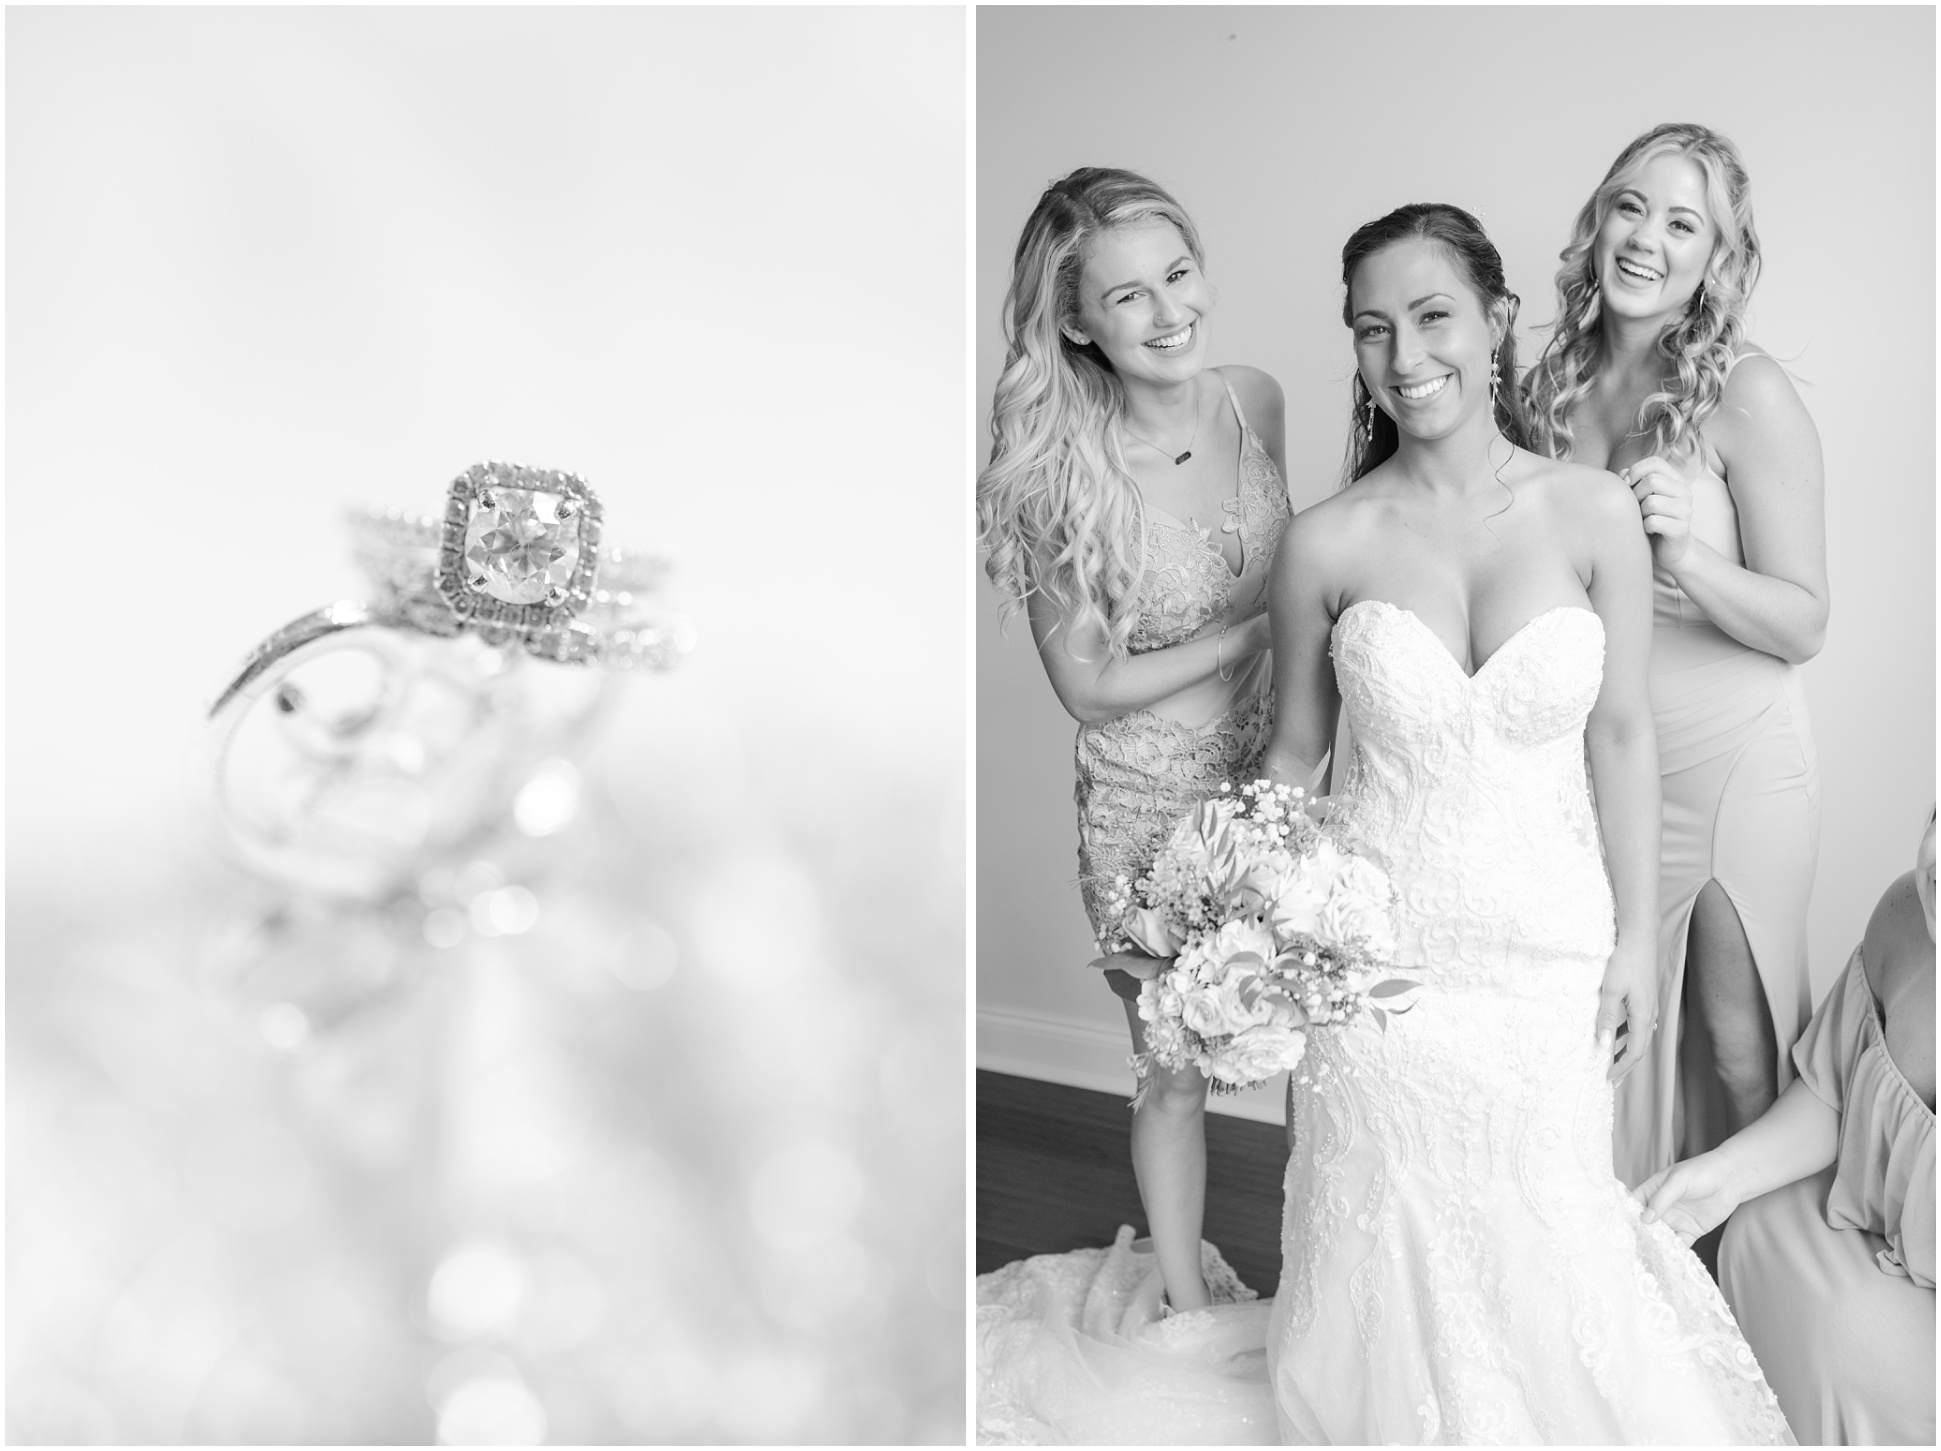 Two black and white images of the rings and the bridal party